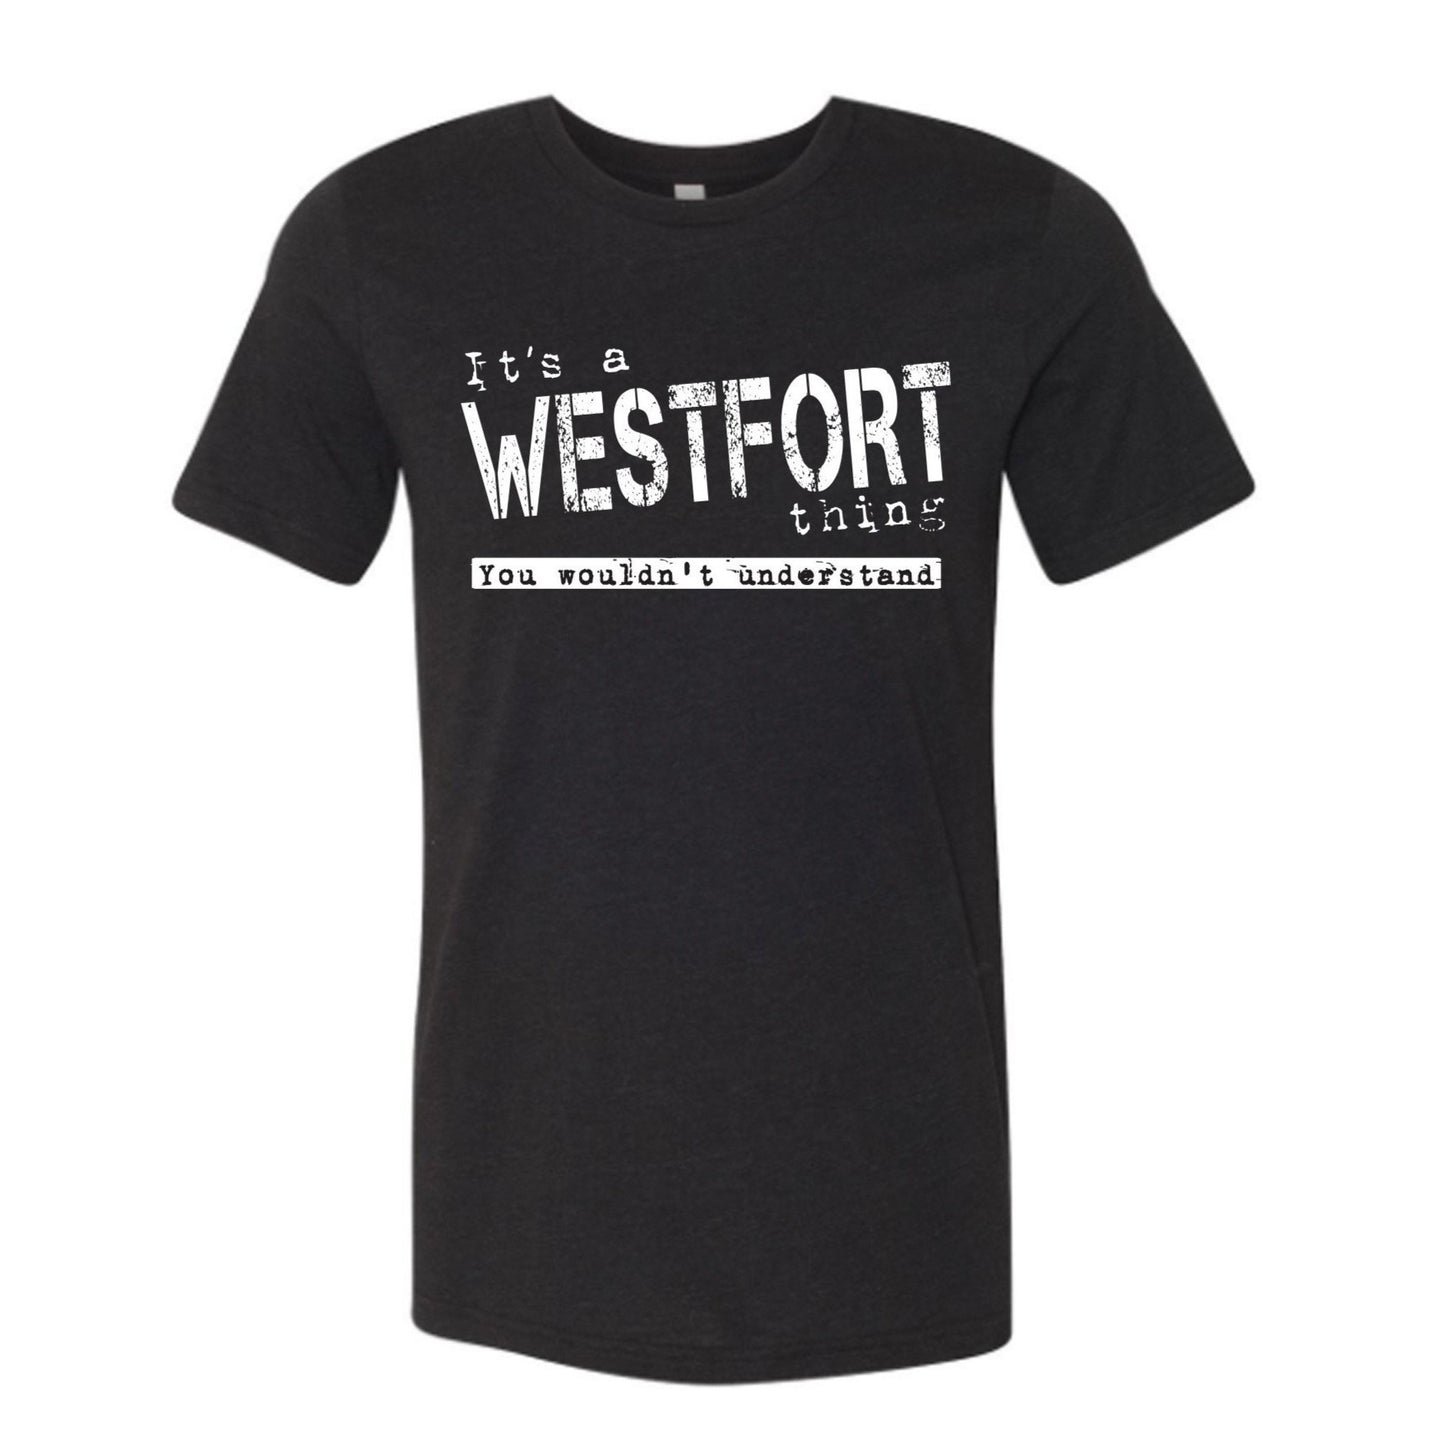 “IT’S A WESTFORT THING” T-SHIRT